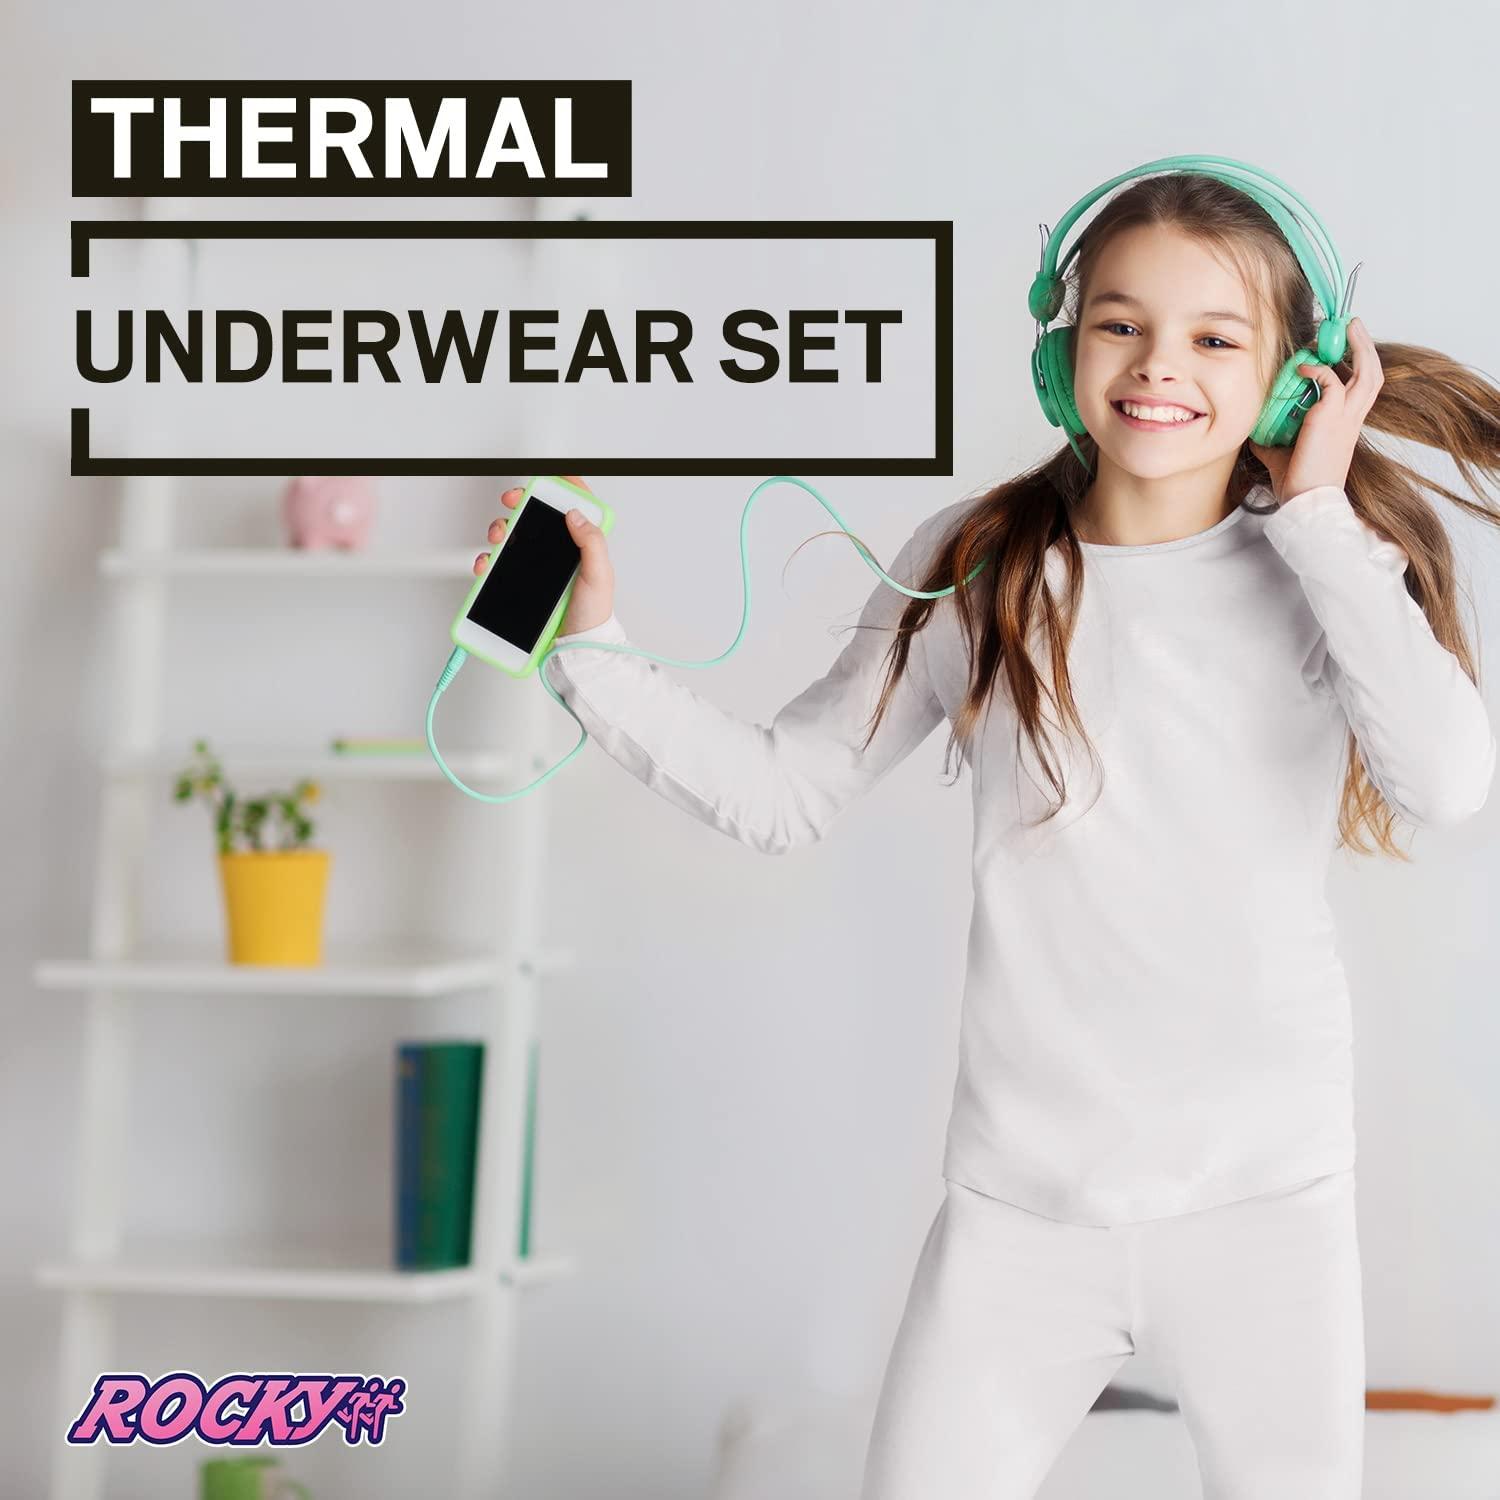  Rocky Thermal Underwear for Women 2 Pack Size X-Small